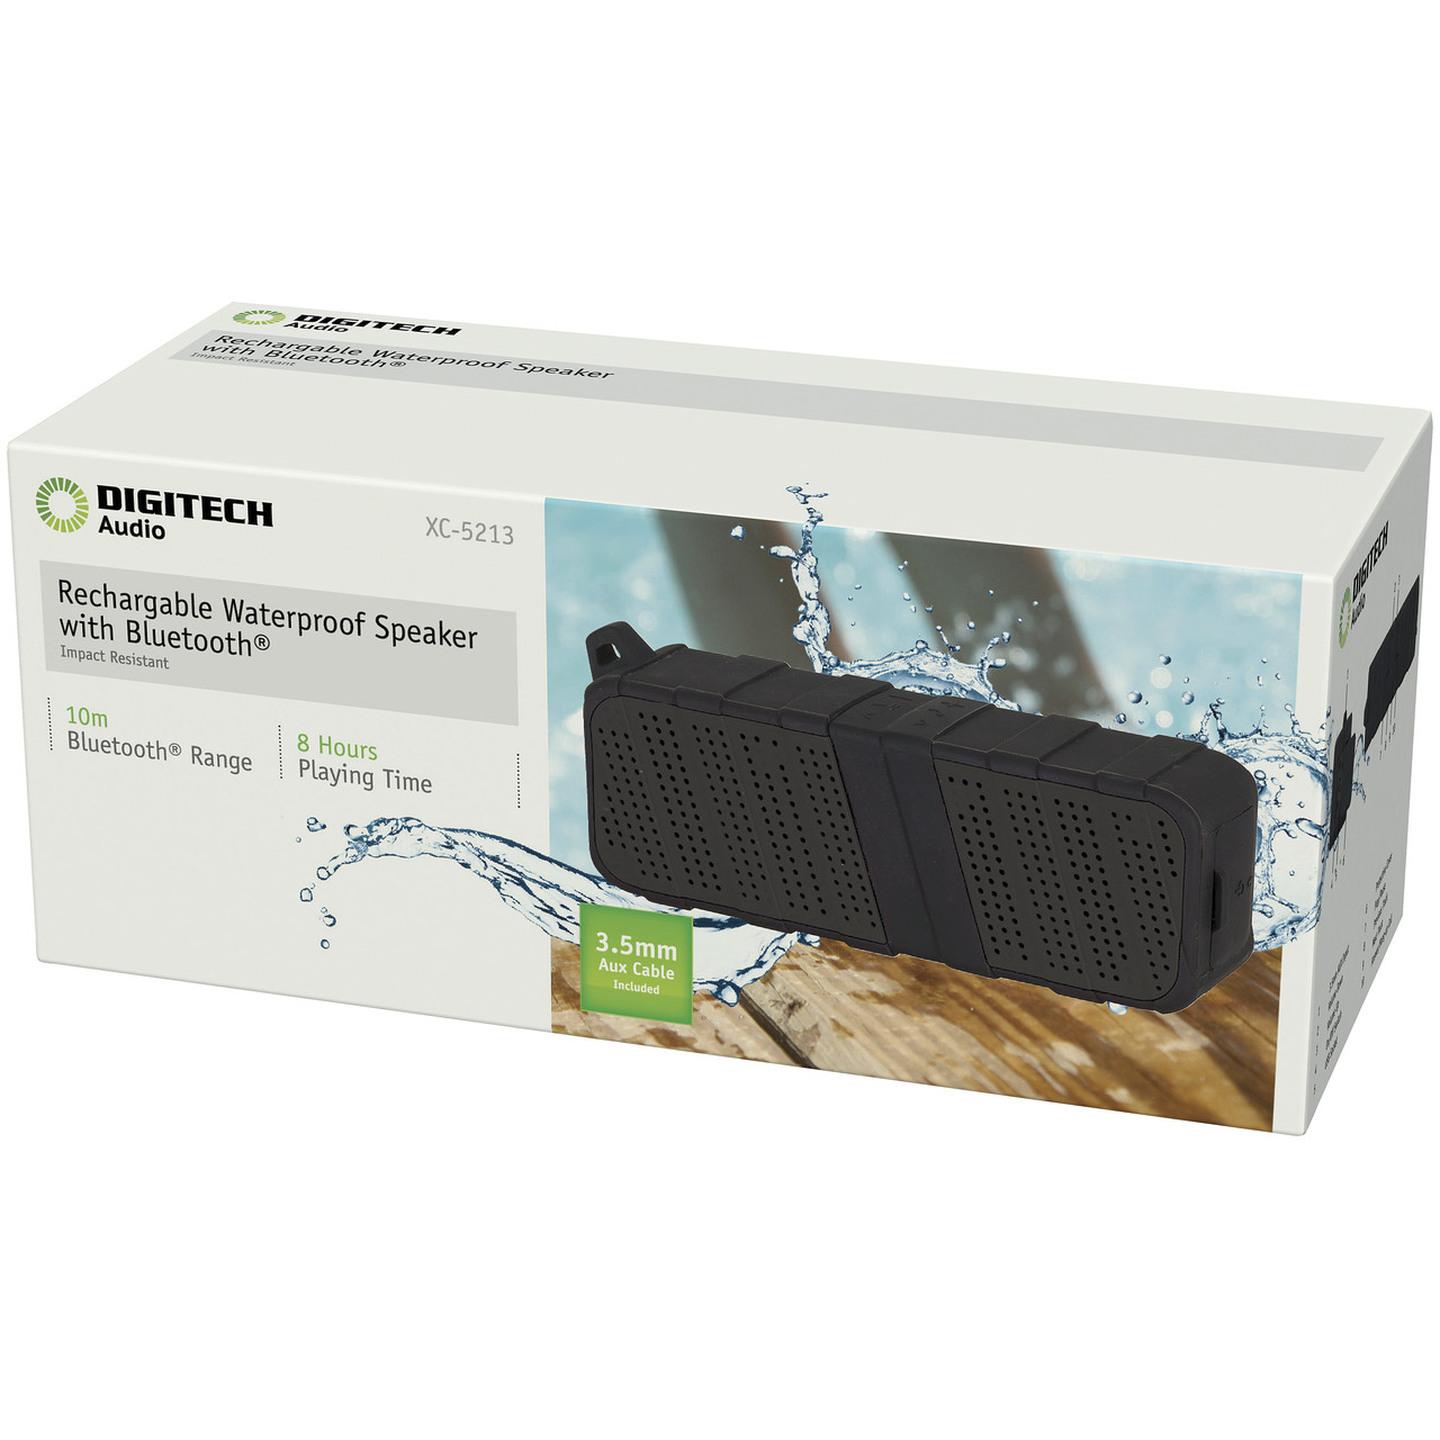 Rechargeable Waterproof Speaker with Bluetooth Technology